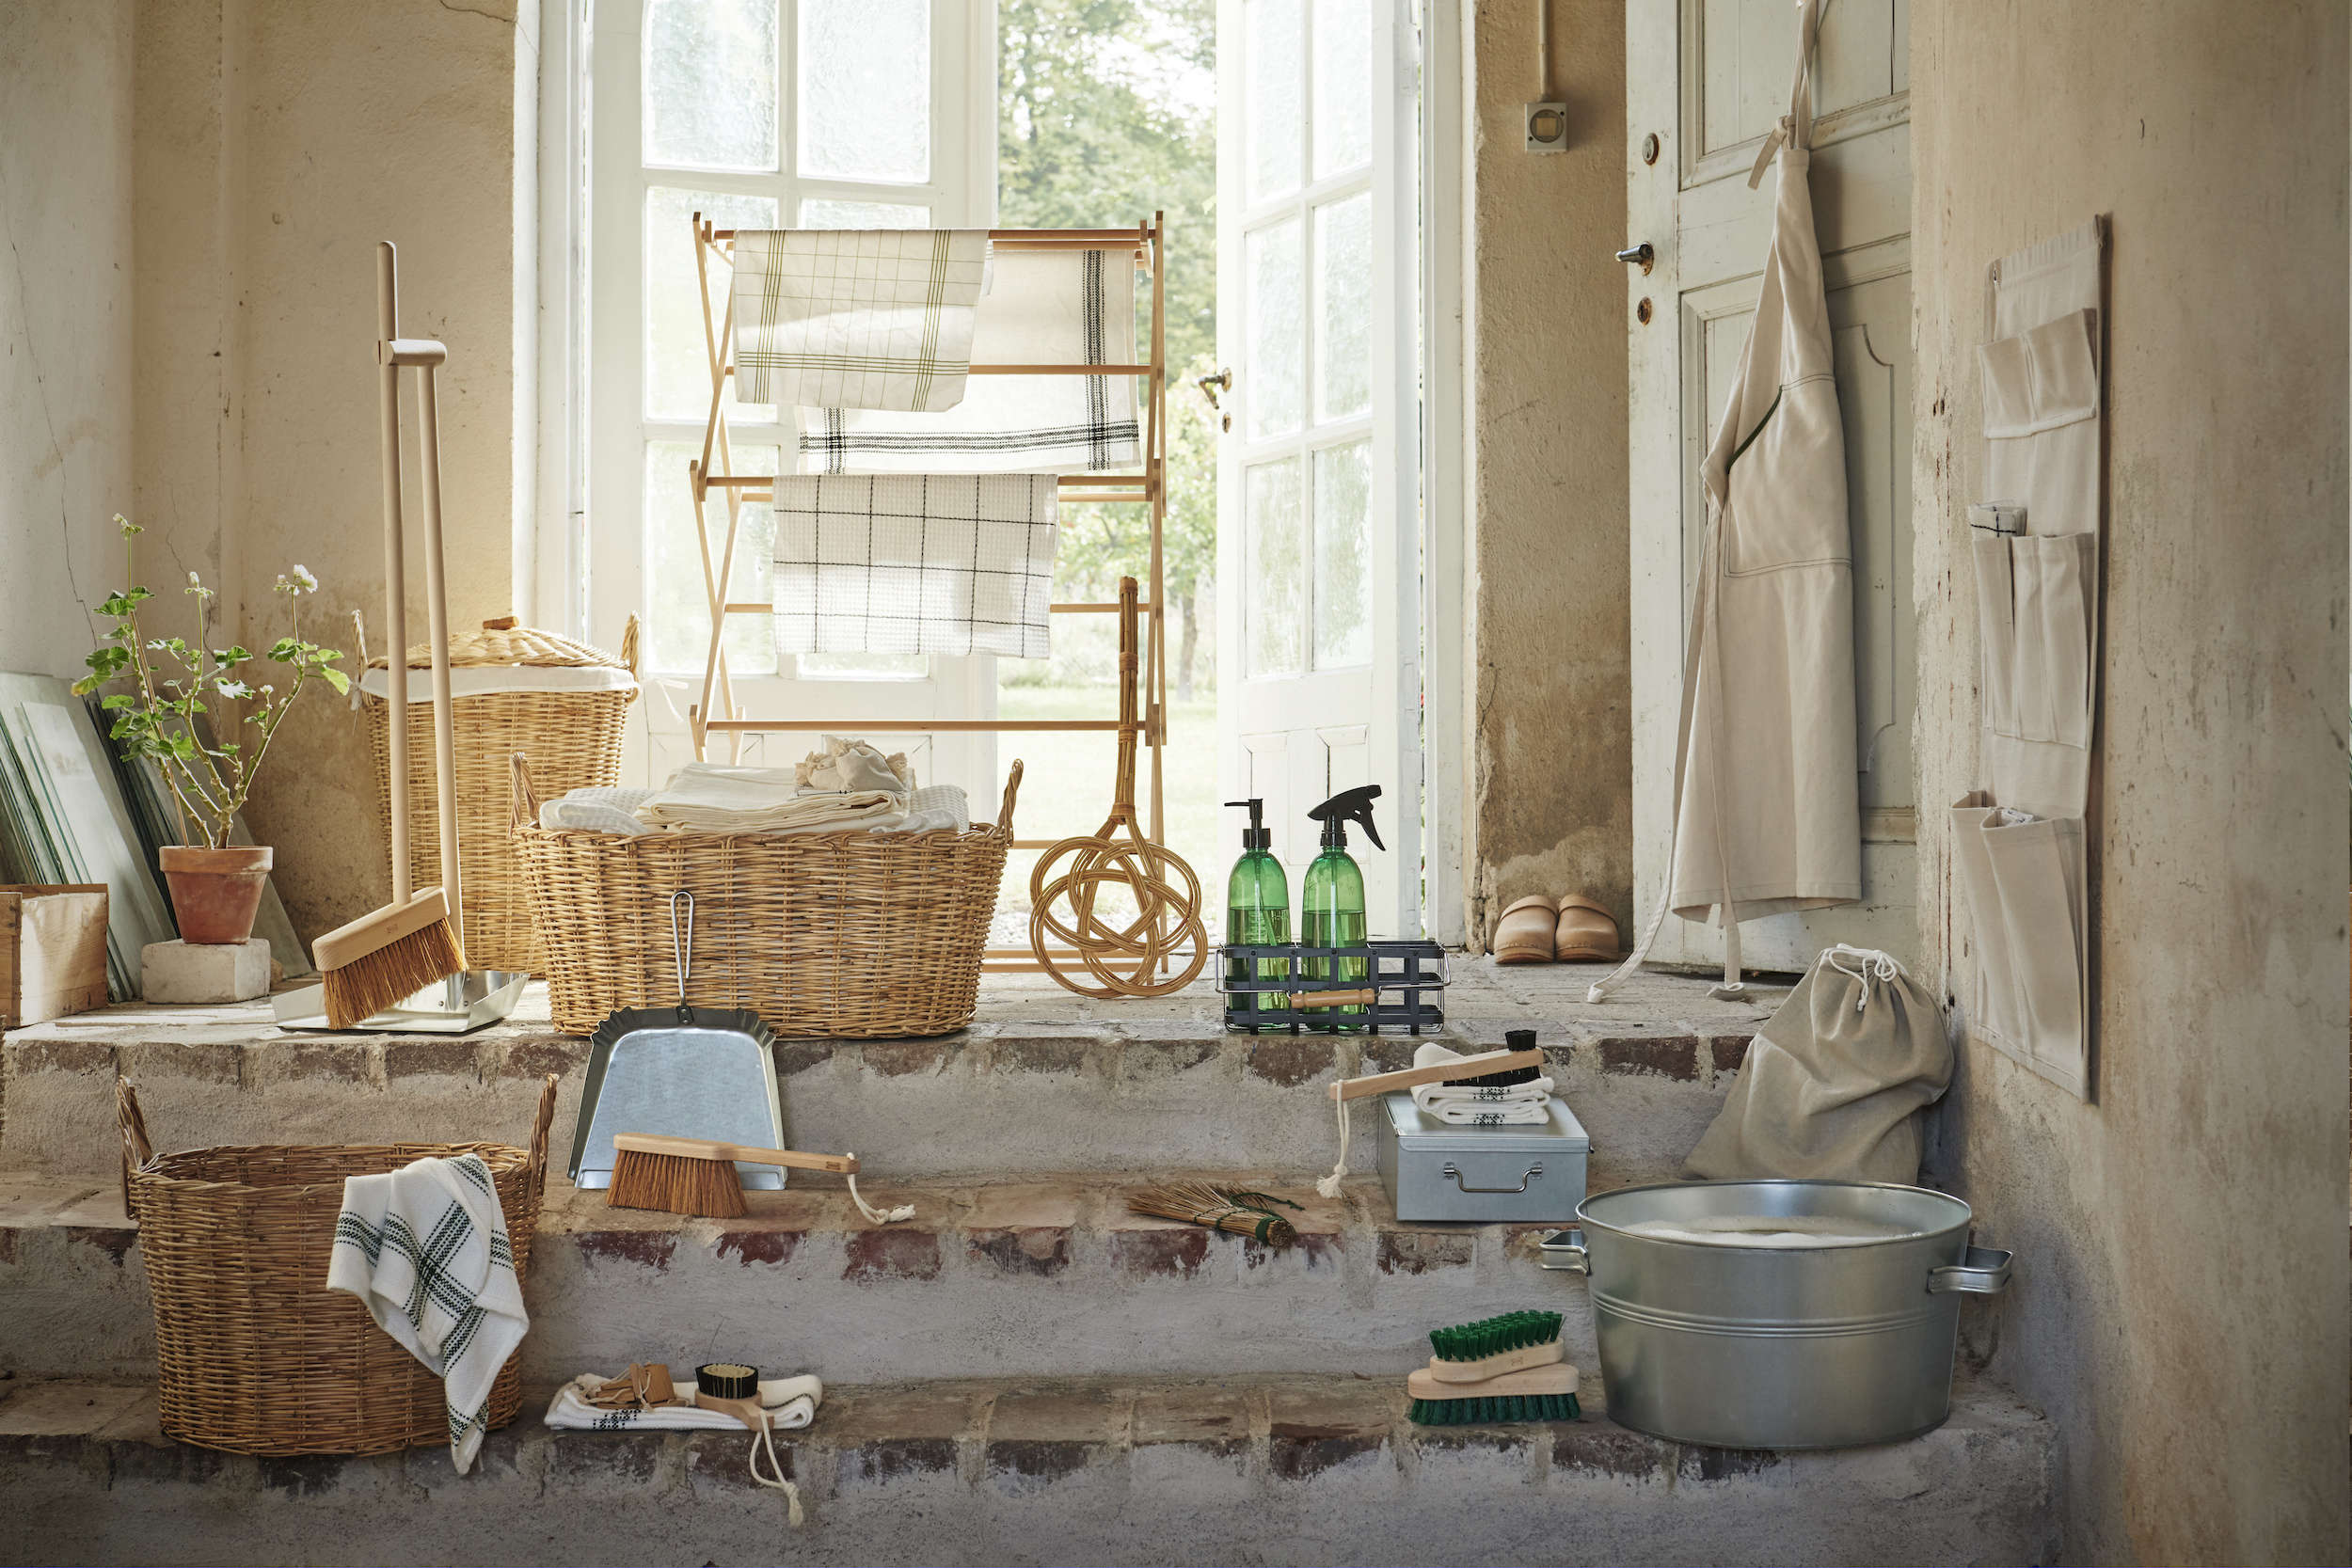 Domestic Science: A New Limited-Edition Collection of Household Wares from Ikea - Remodelista